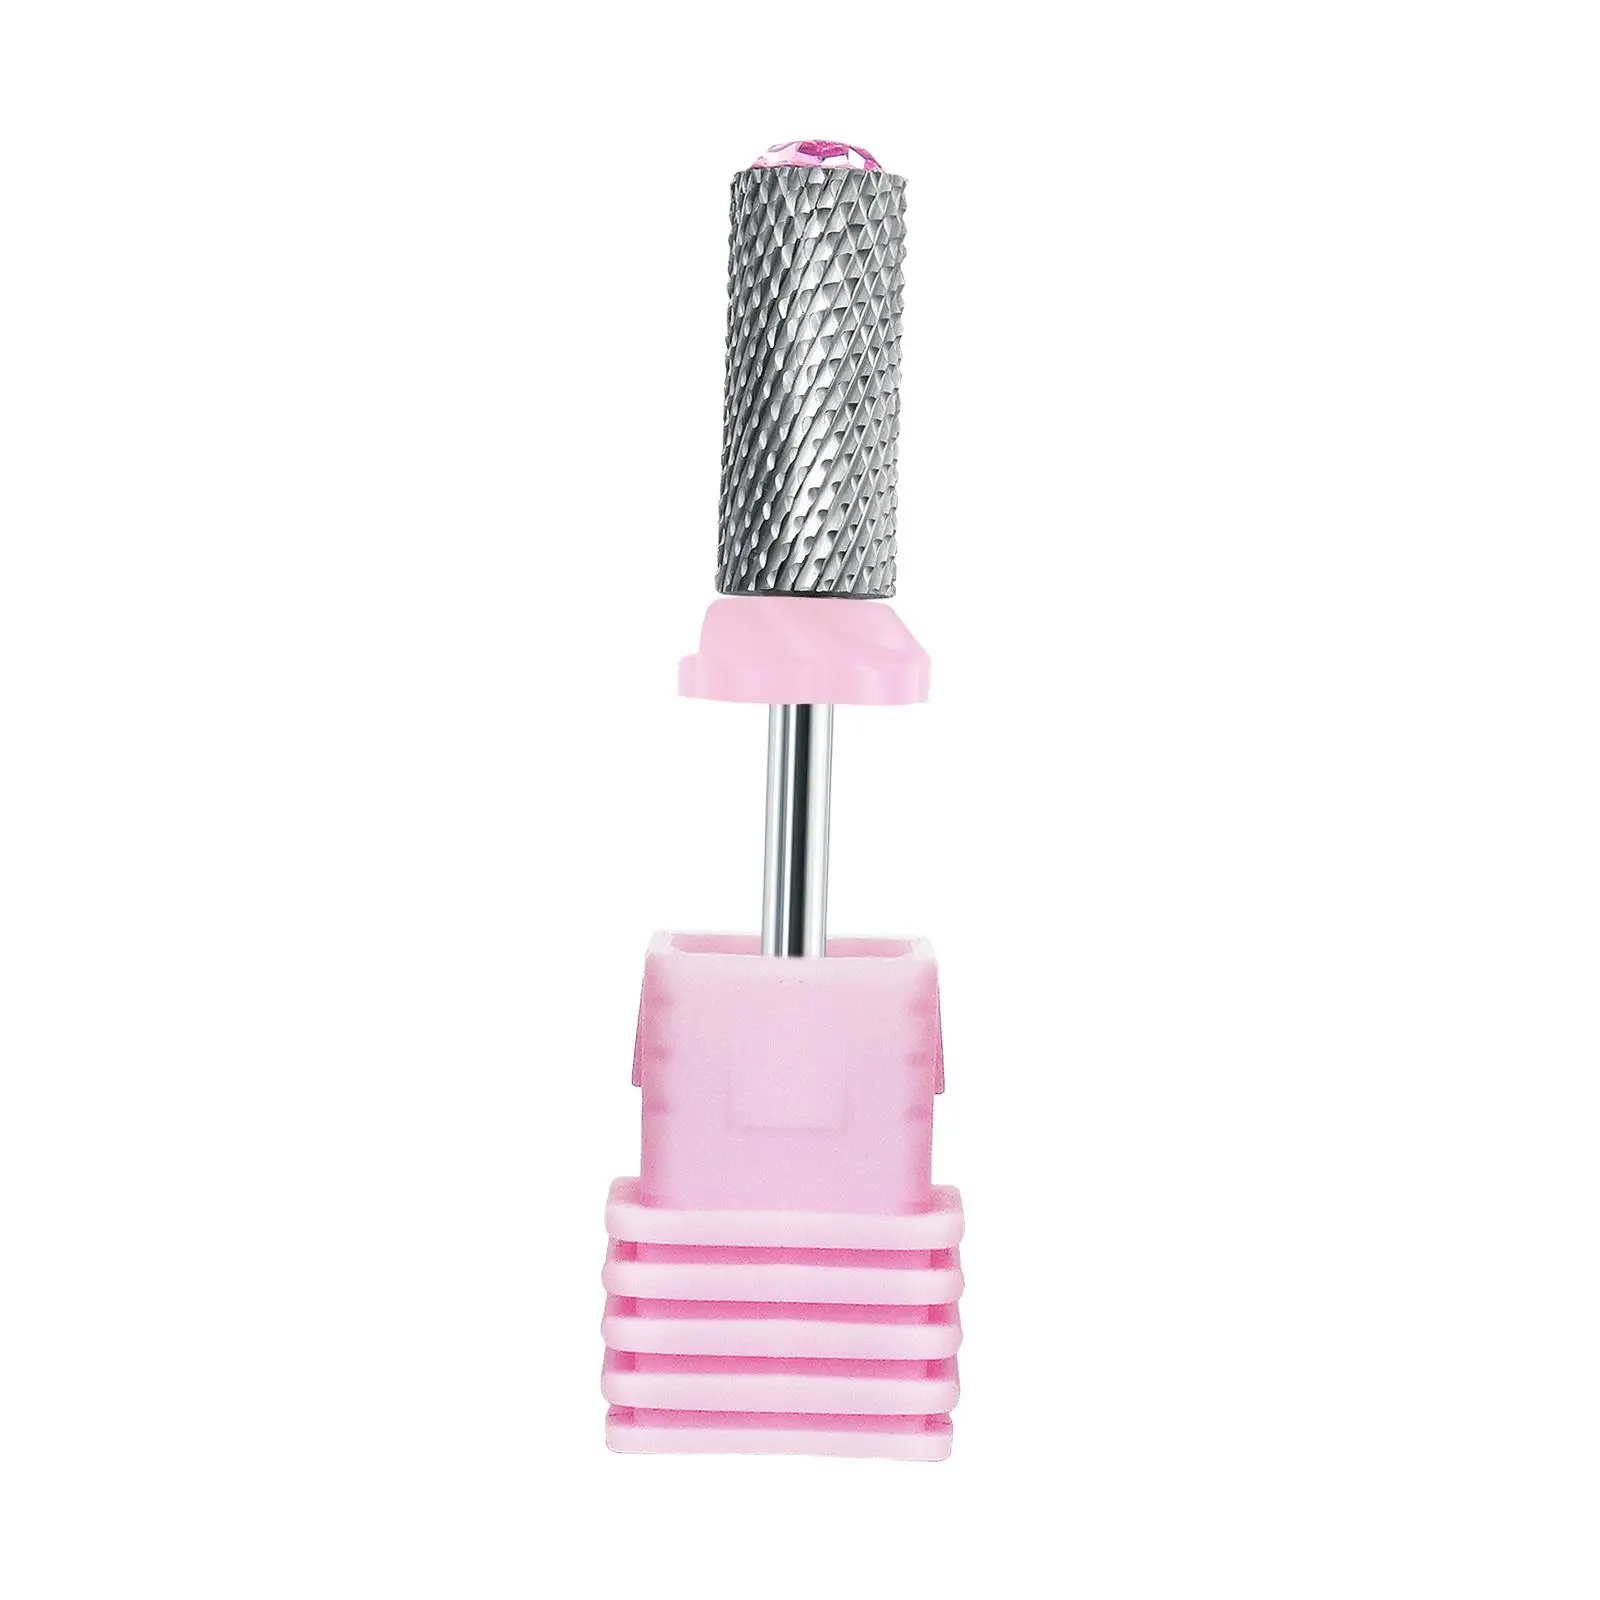 Nail Drill Bit Accessories Manicure Pedicure Tool Nail Art Tool Rotary Burrs Cuticle Remover Bit for Acrylic Gel Nails Salon Use